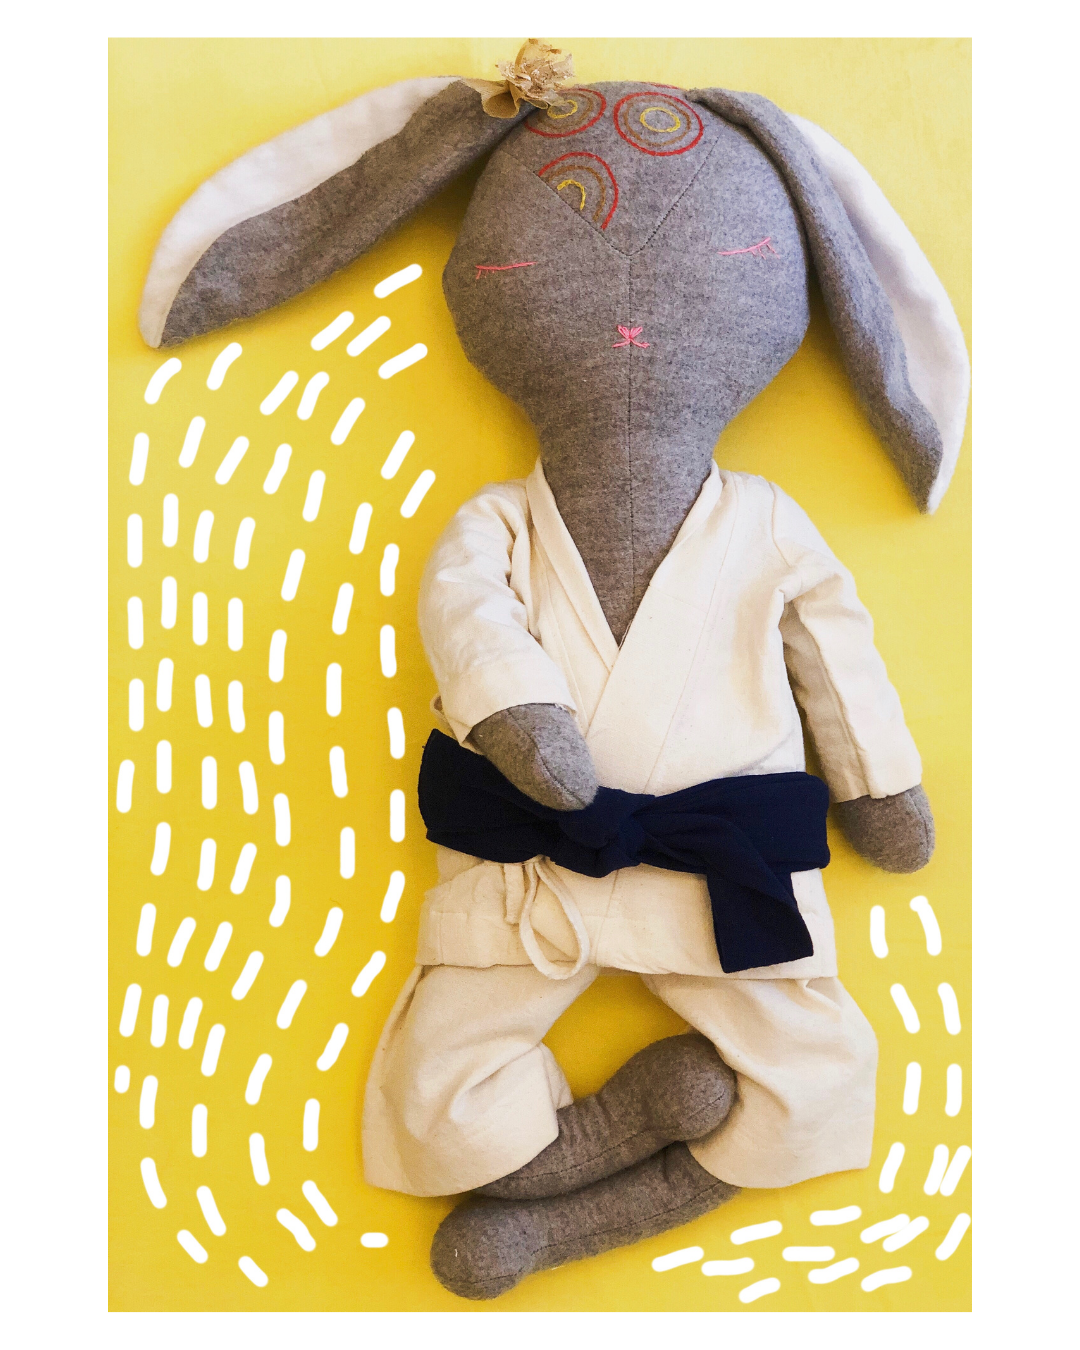 Rae the Rabbit - Fabric doll by Pookies - Handmade stuffed toy